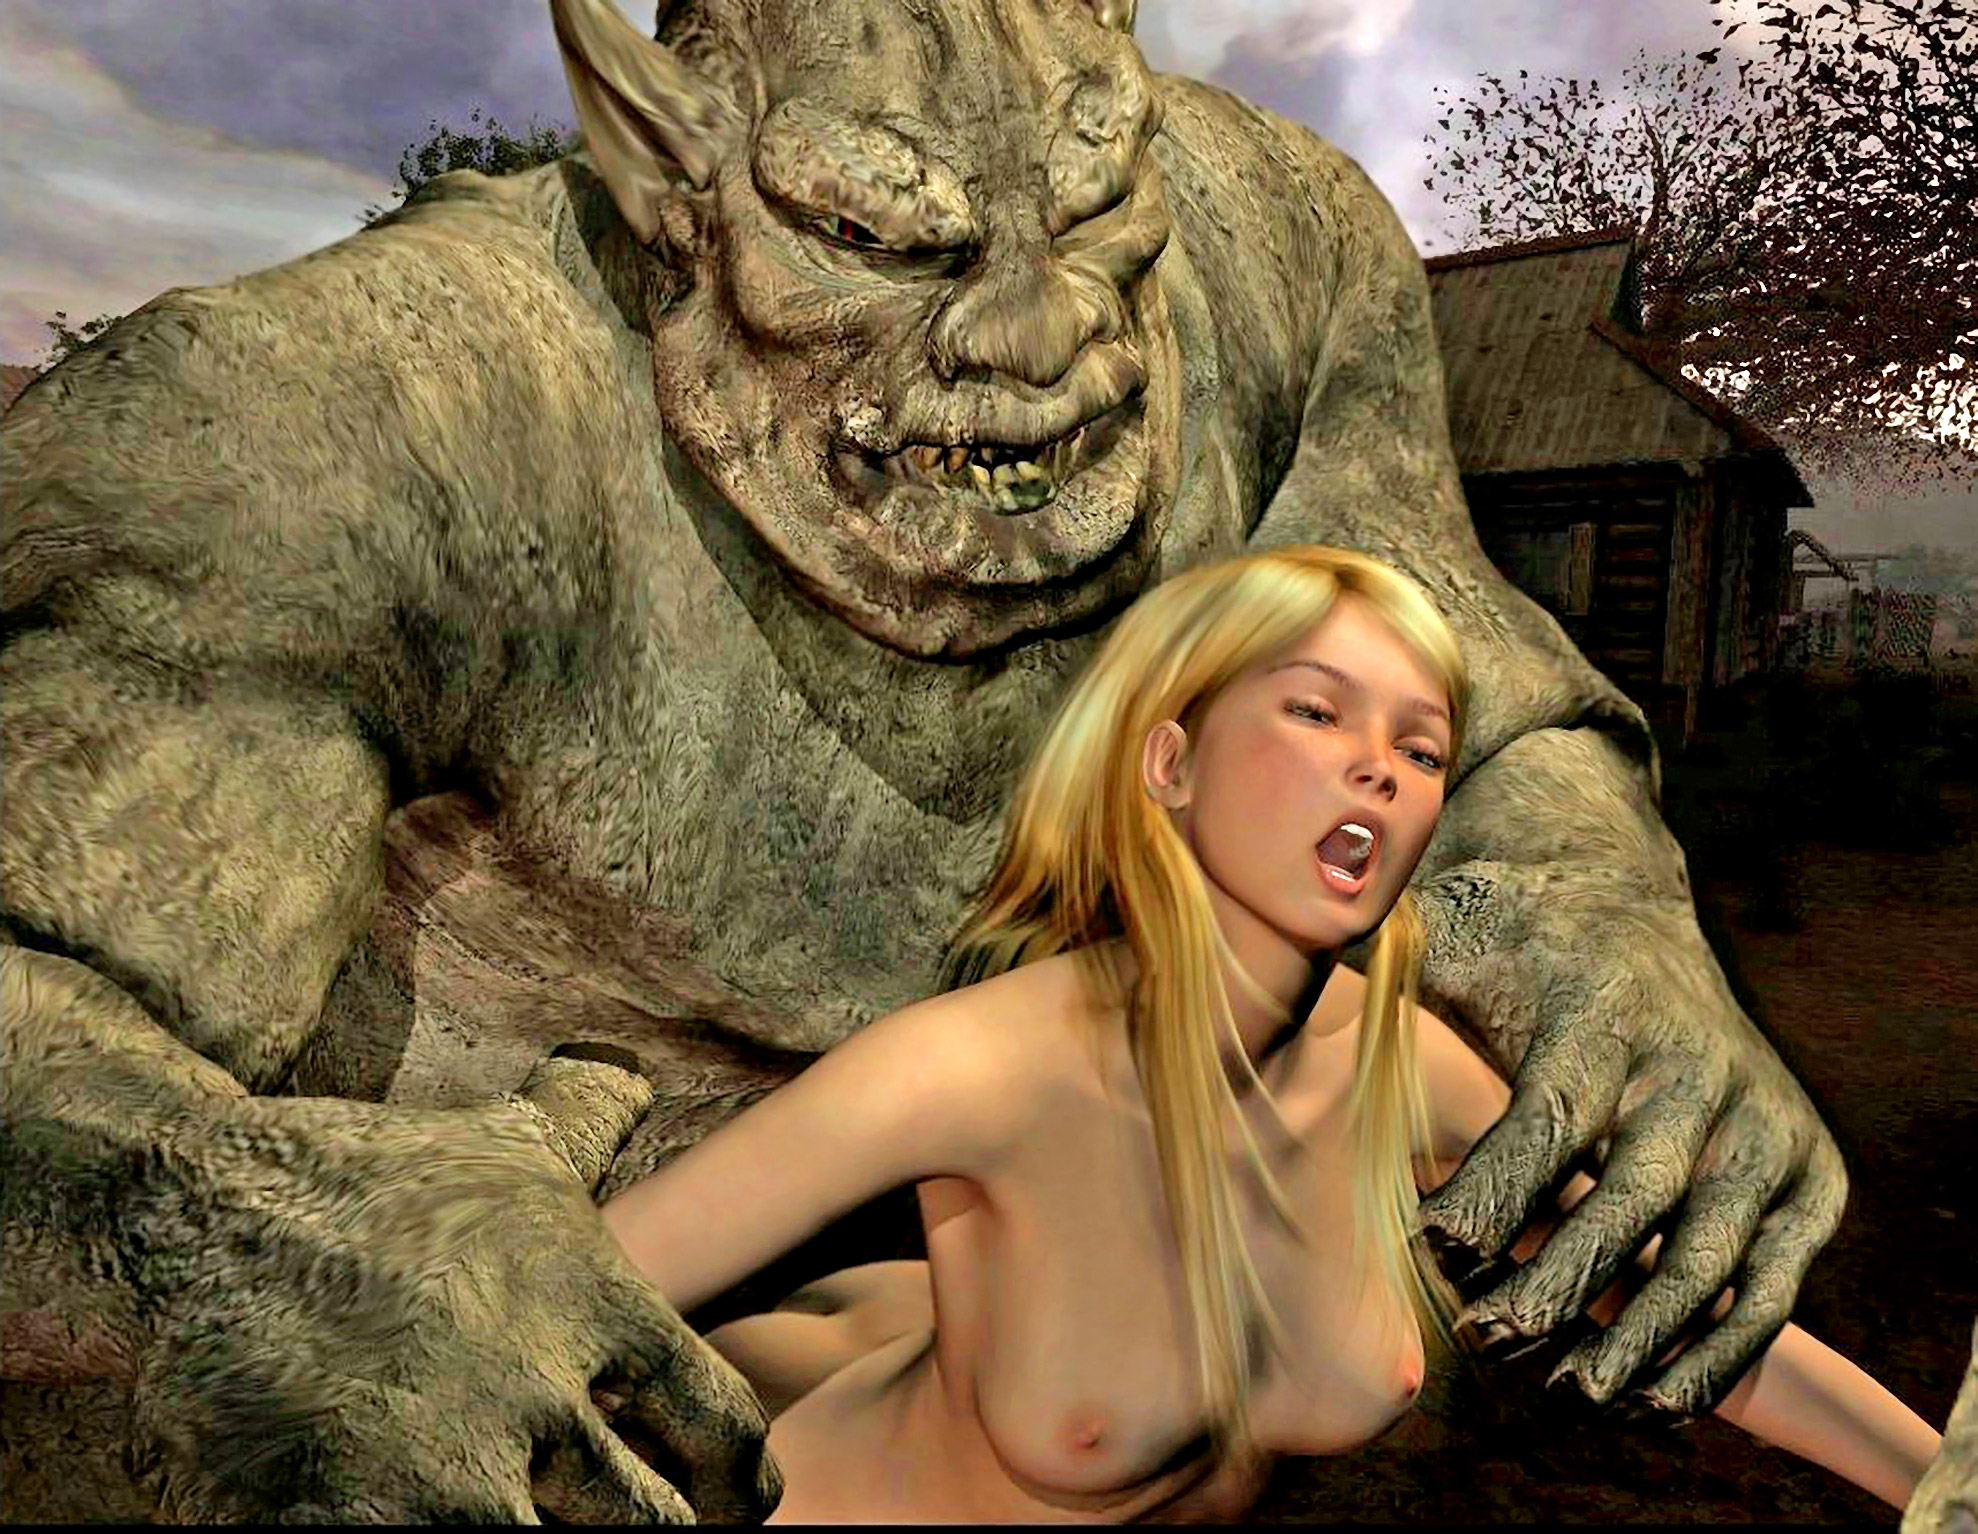 Free Monster Porn - Awesome 3d monsterporn free gallery filled with amazing girl on demon  action. | KingdomOfEvil 3d